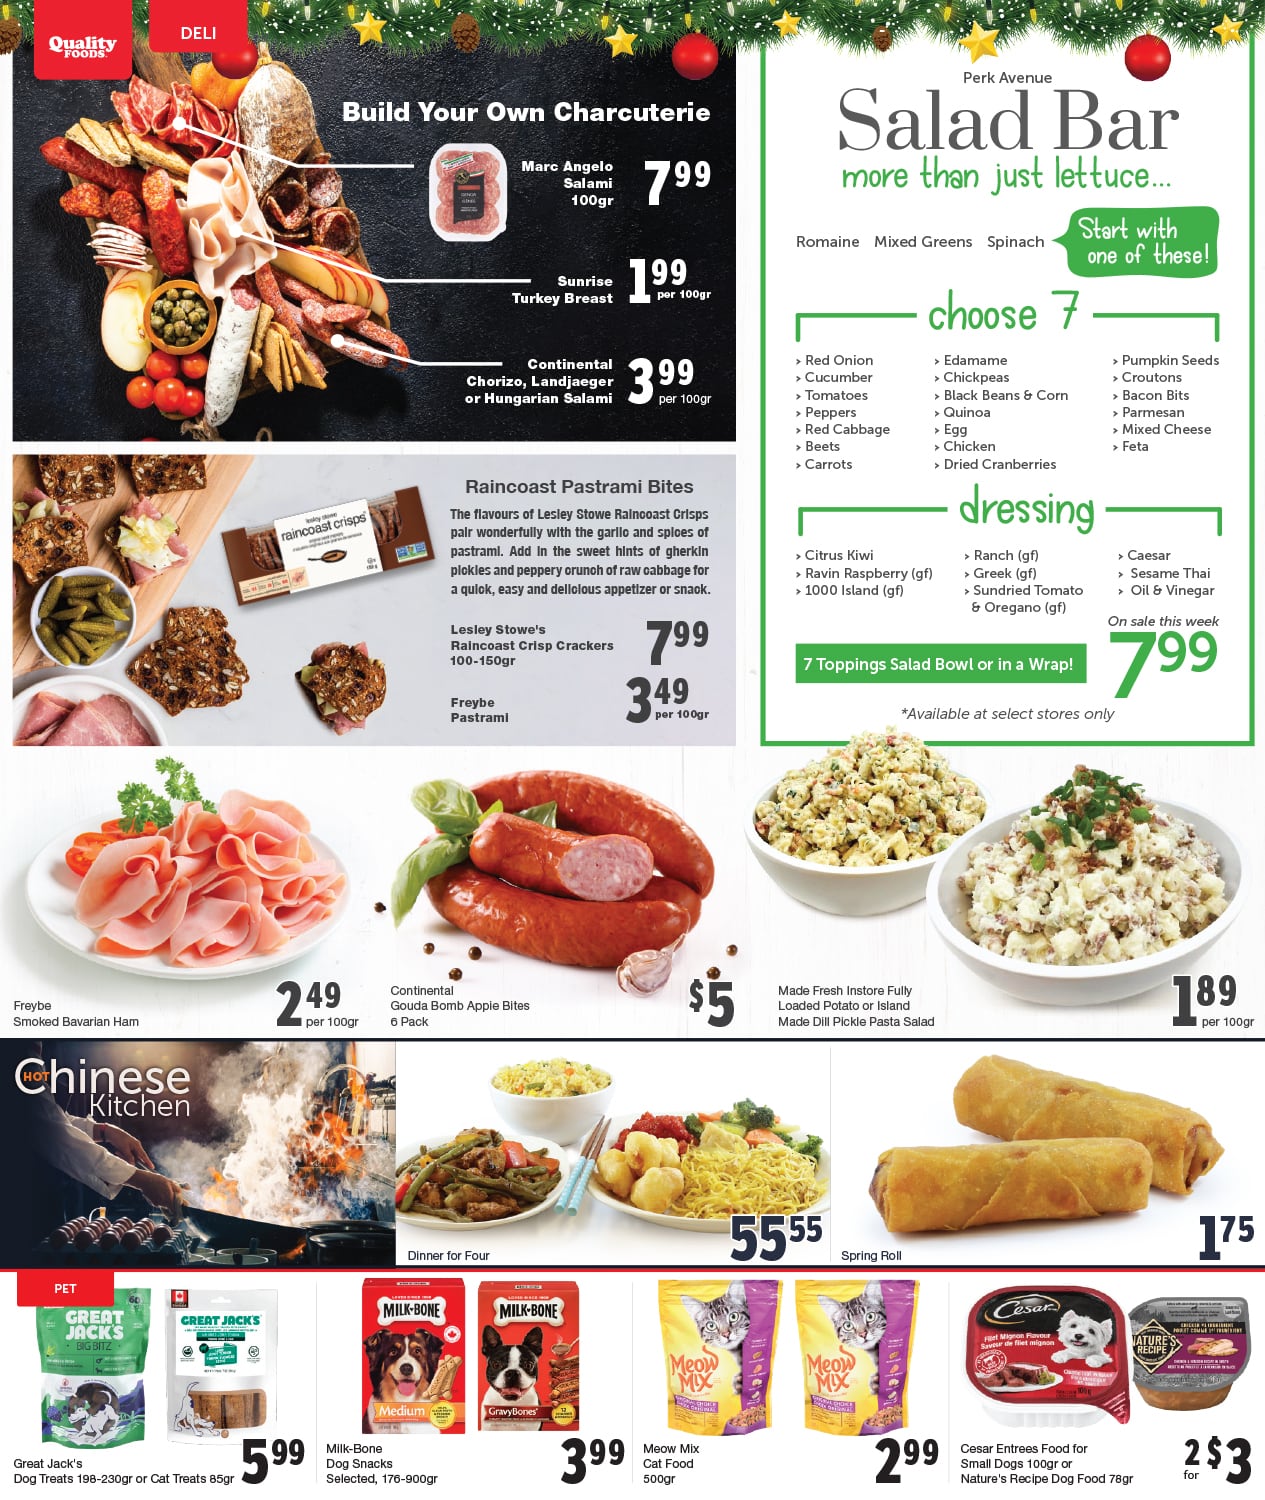 Quality Foods - Weekly Flyer Specials - Page 7